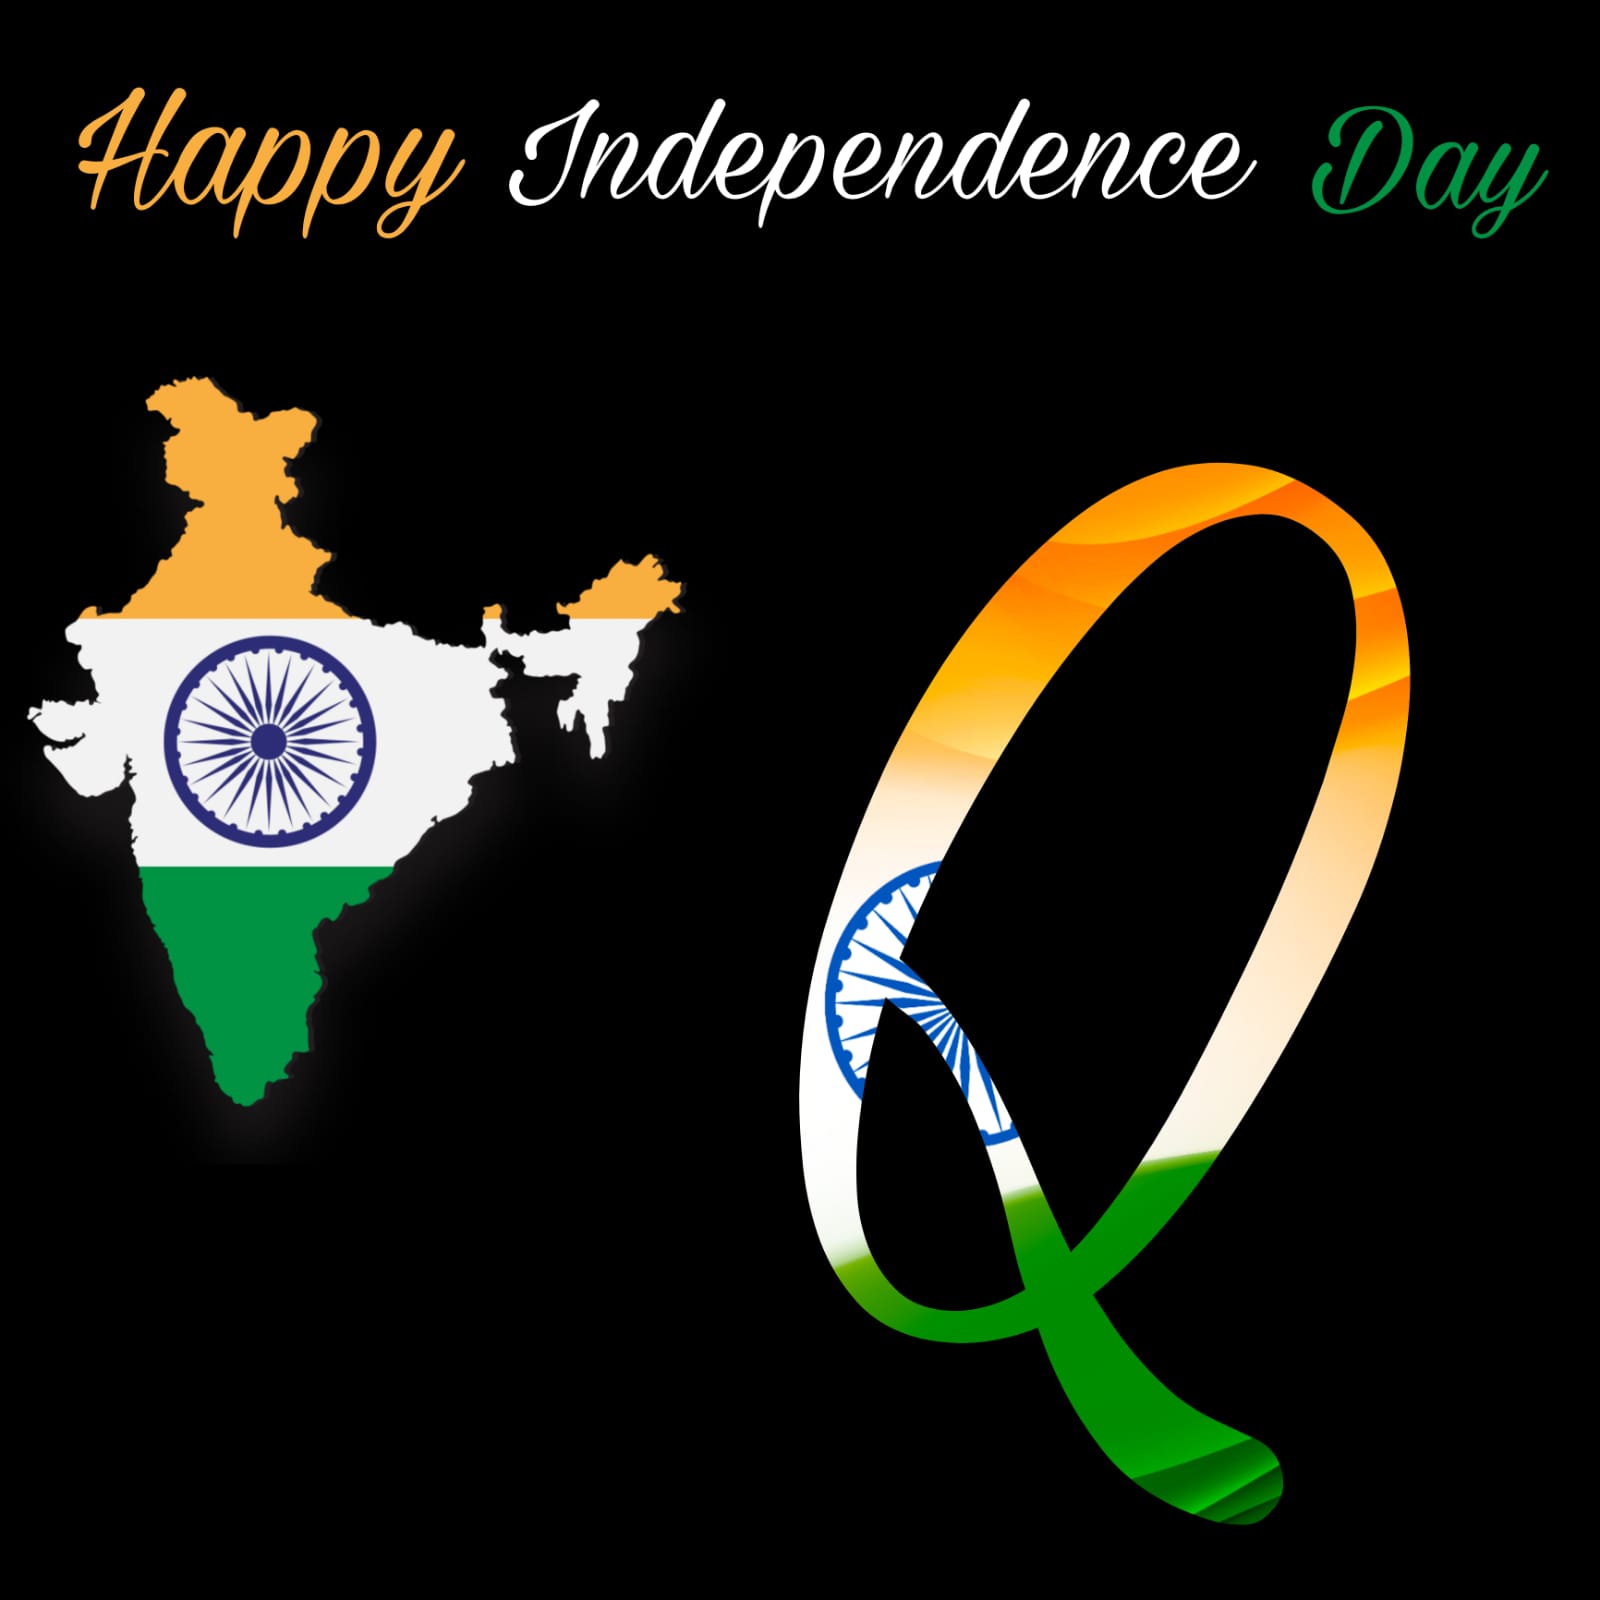 Independence Day DP For Whatsapp, Facebook, Instagram, Twitter, And Other  Social Media Platforms - Mixing Images